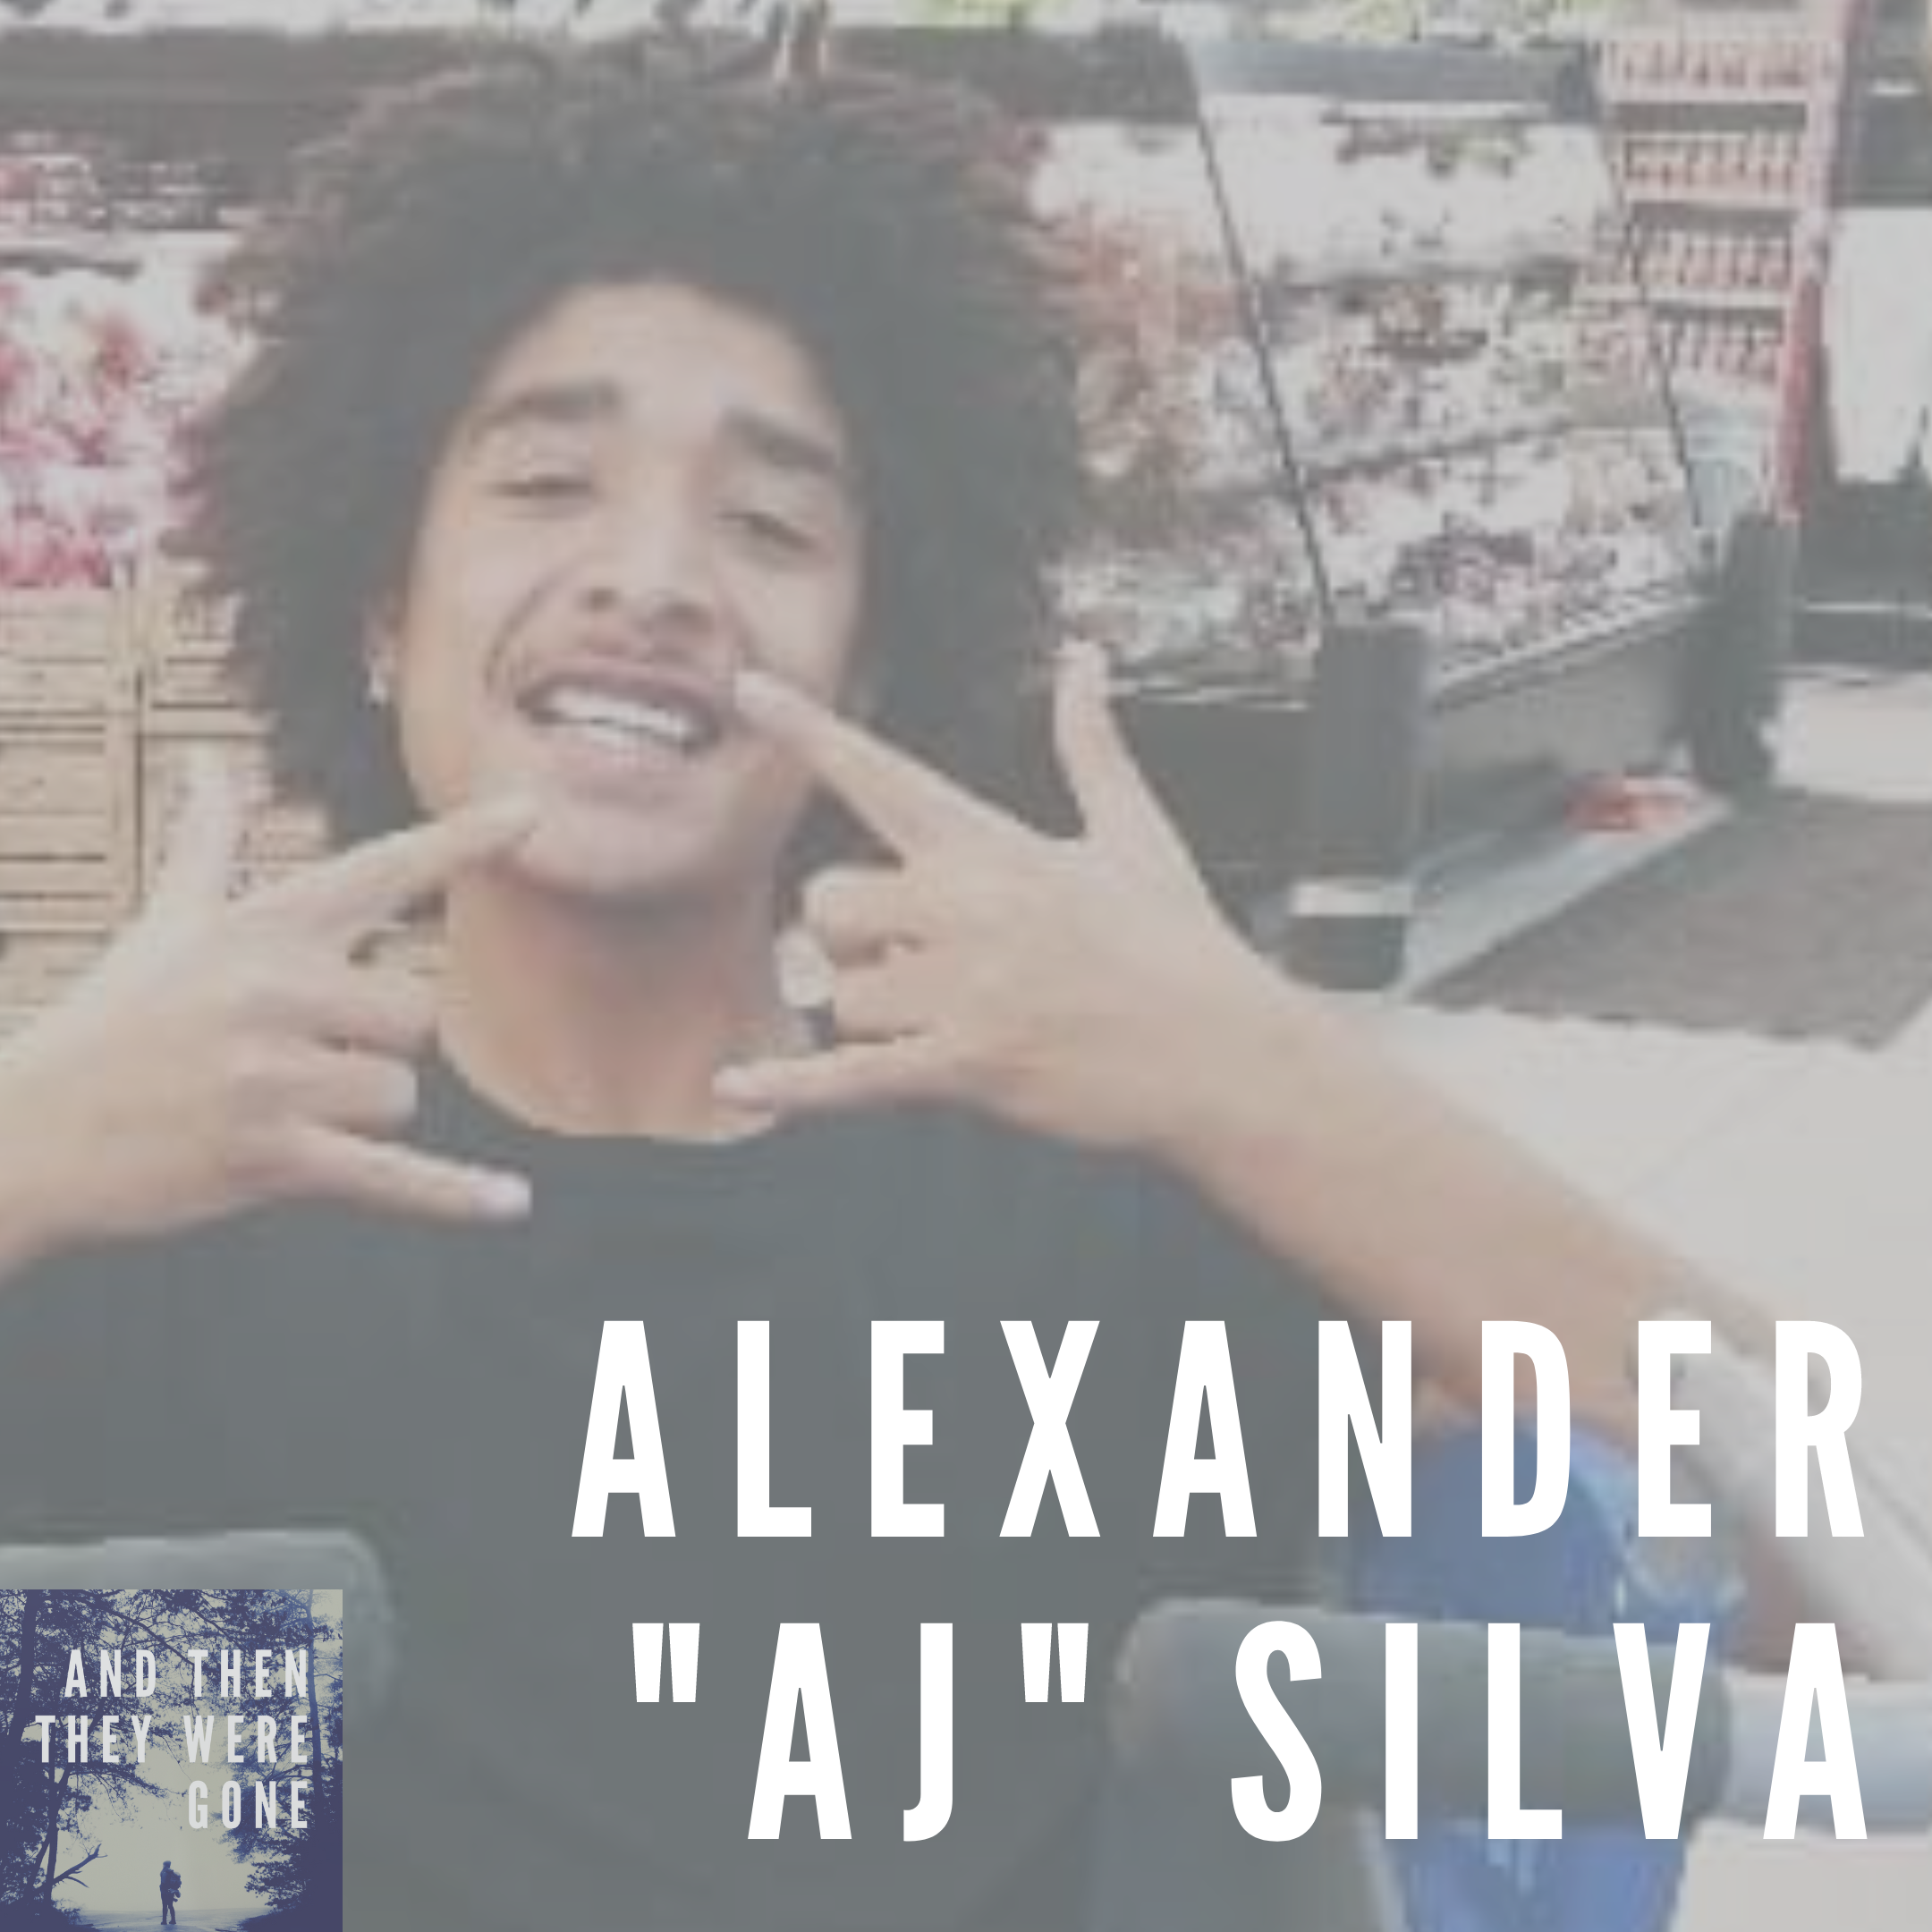 AJ Silva has been missing from Houston, TX since around April 17, 2021